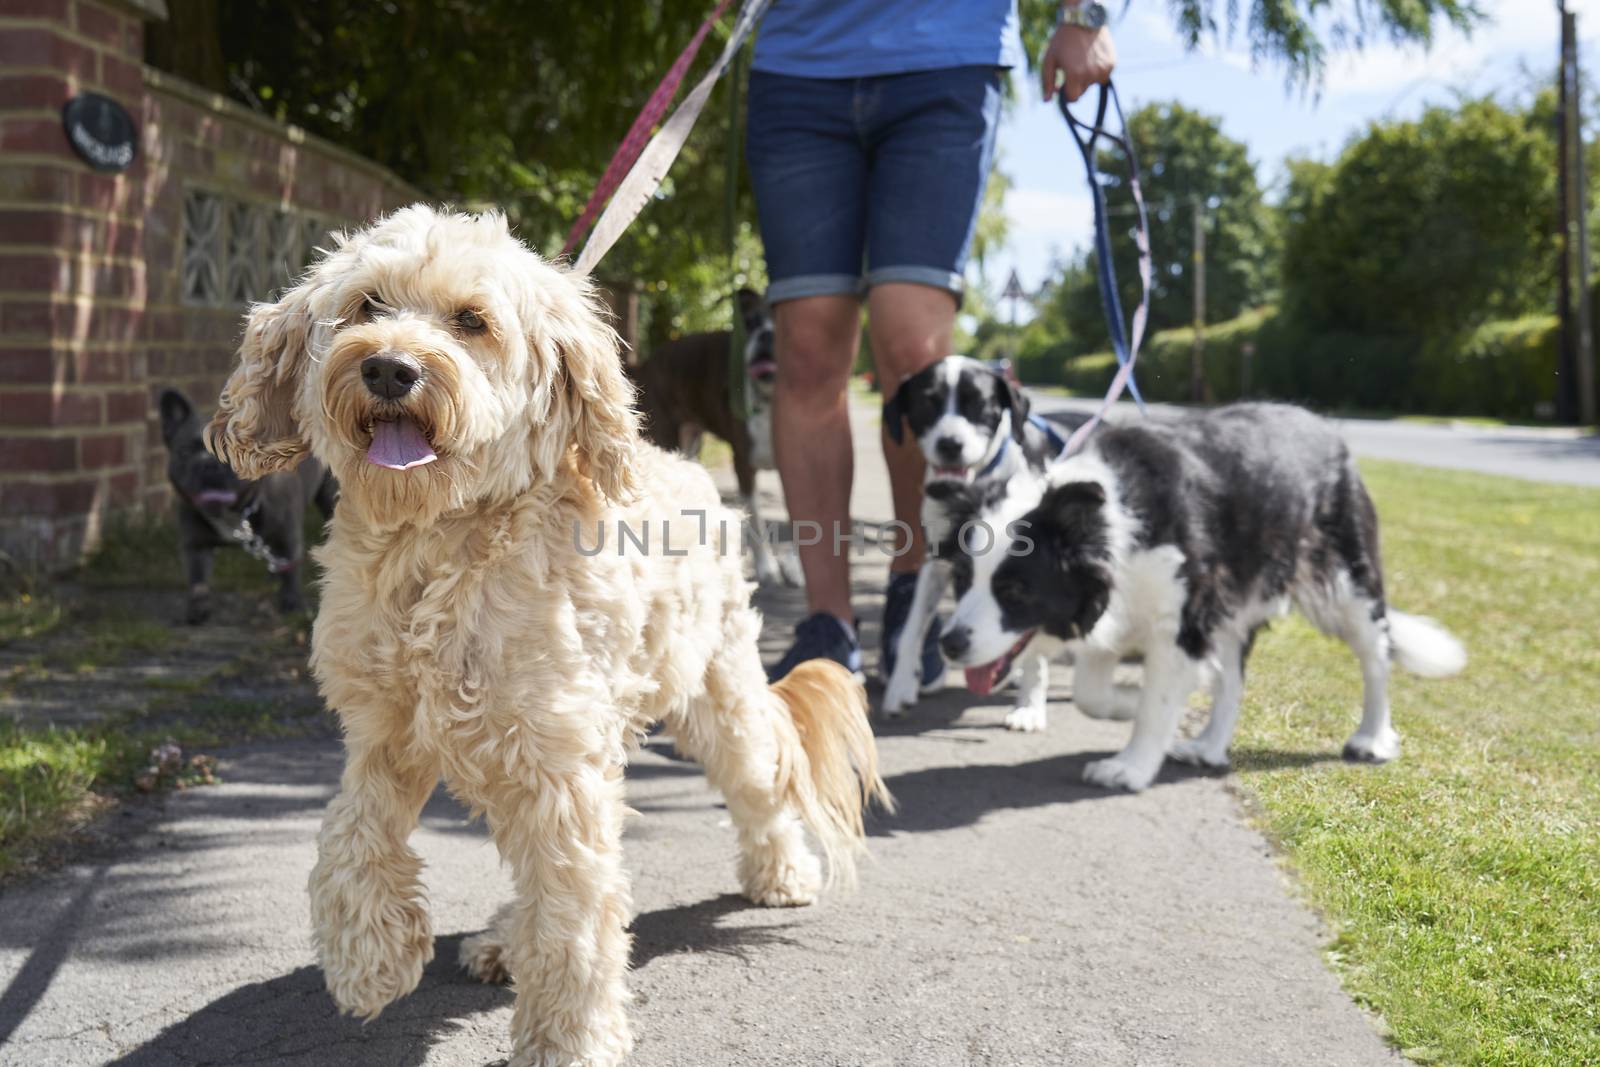 Close up of cockapoo pet dog being walked on suburban street with other dogs by male dog walker